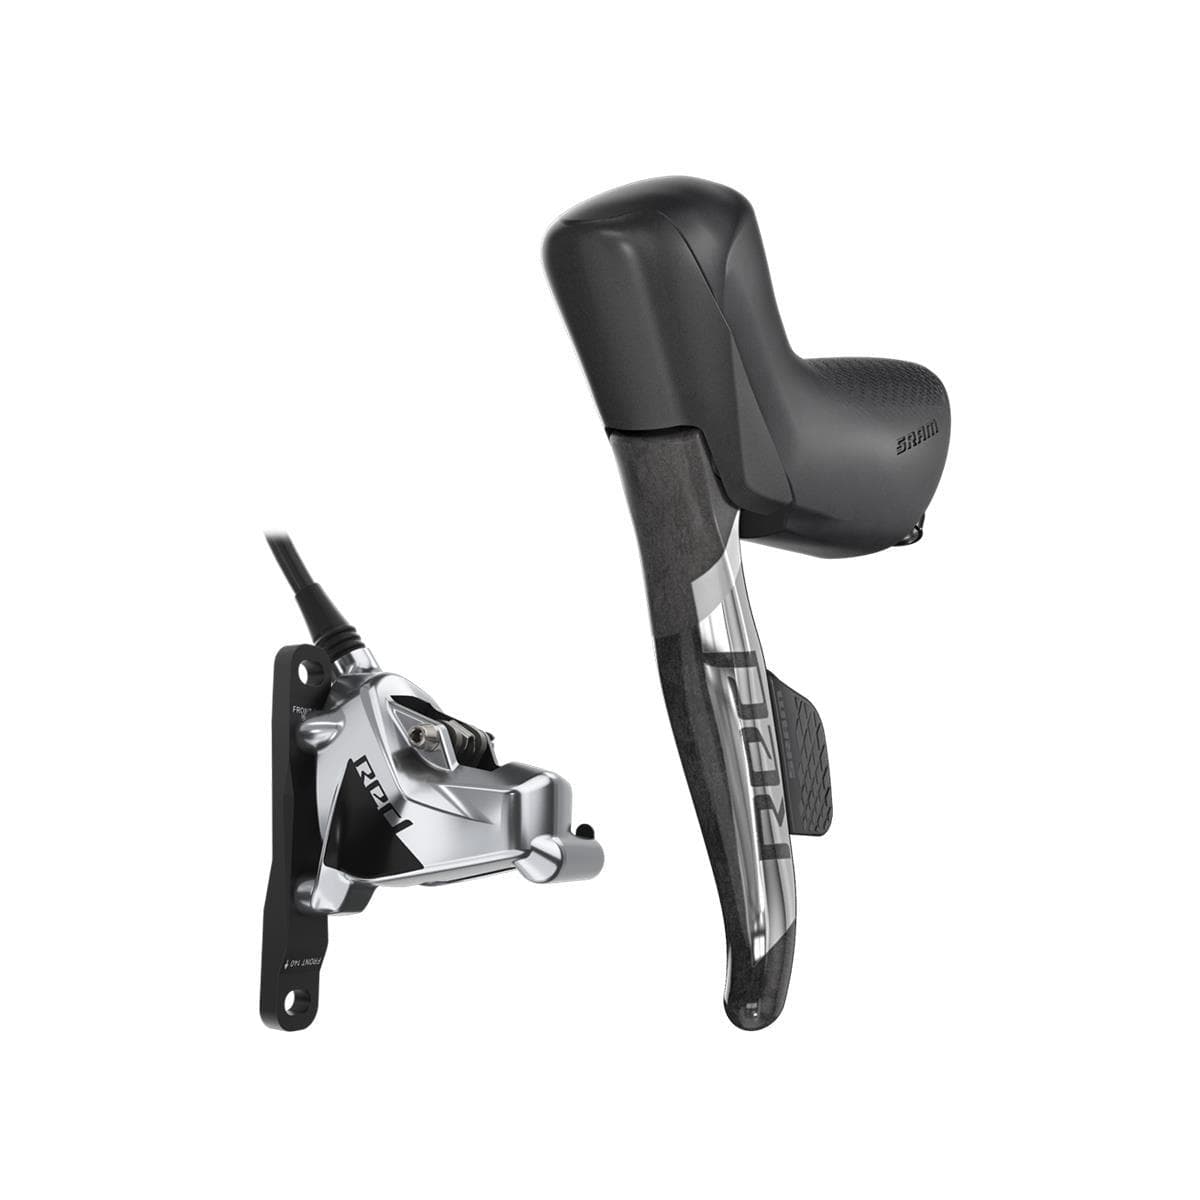 Sram Shift/Hydraulic Disc Brake Red Etap Axs D1 Stealthamajig Connected Rear Brake/Left Shift 1800Mm W/ Flat Mount 20Mm Ti Hardware 2 Piece Caliper (Rotor & Bracket Sold Separately):